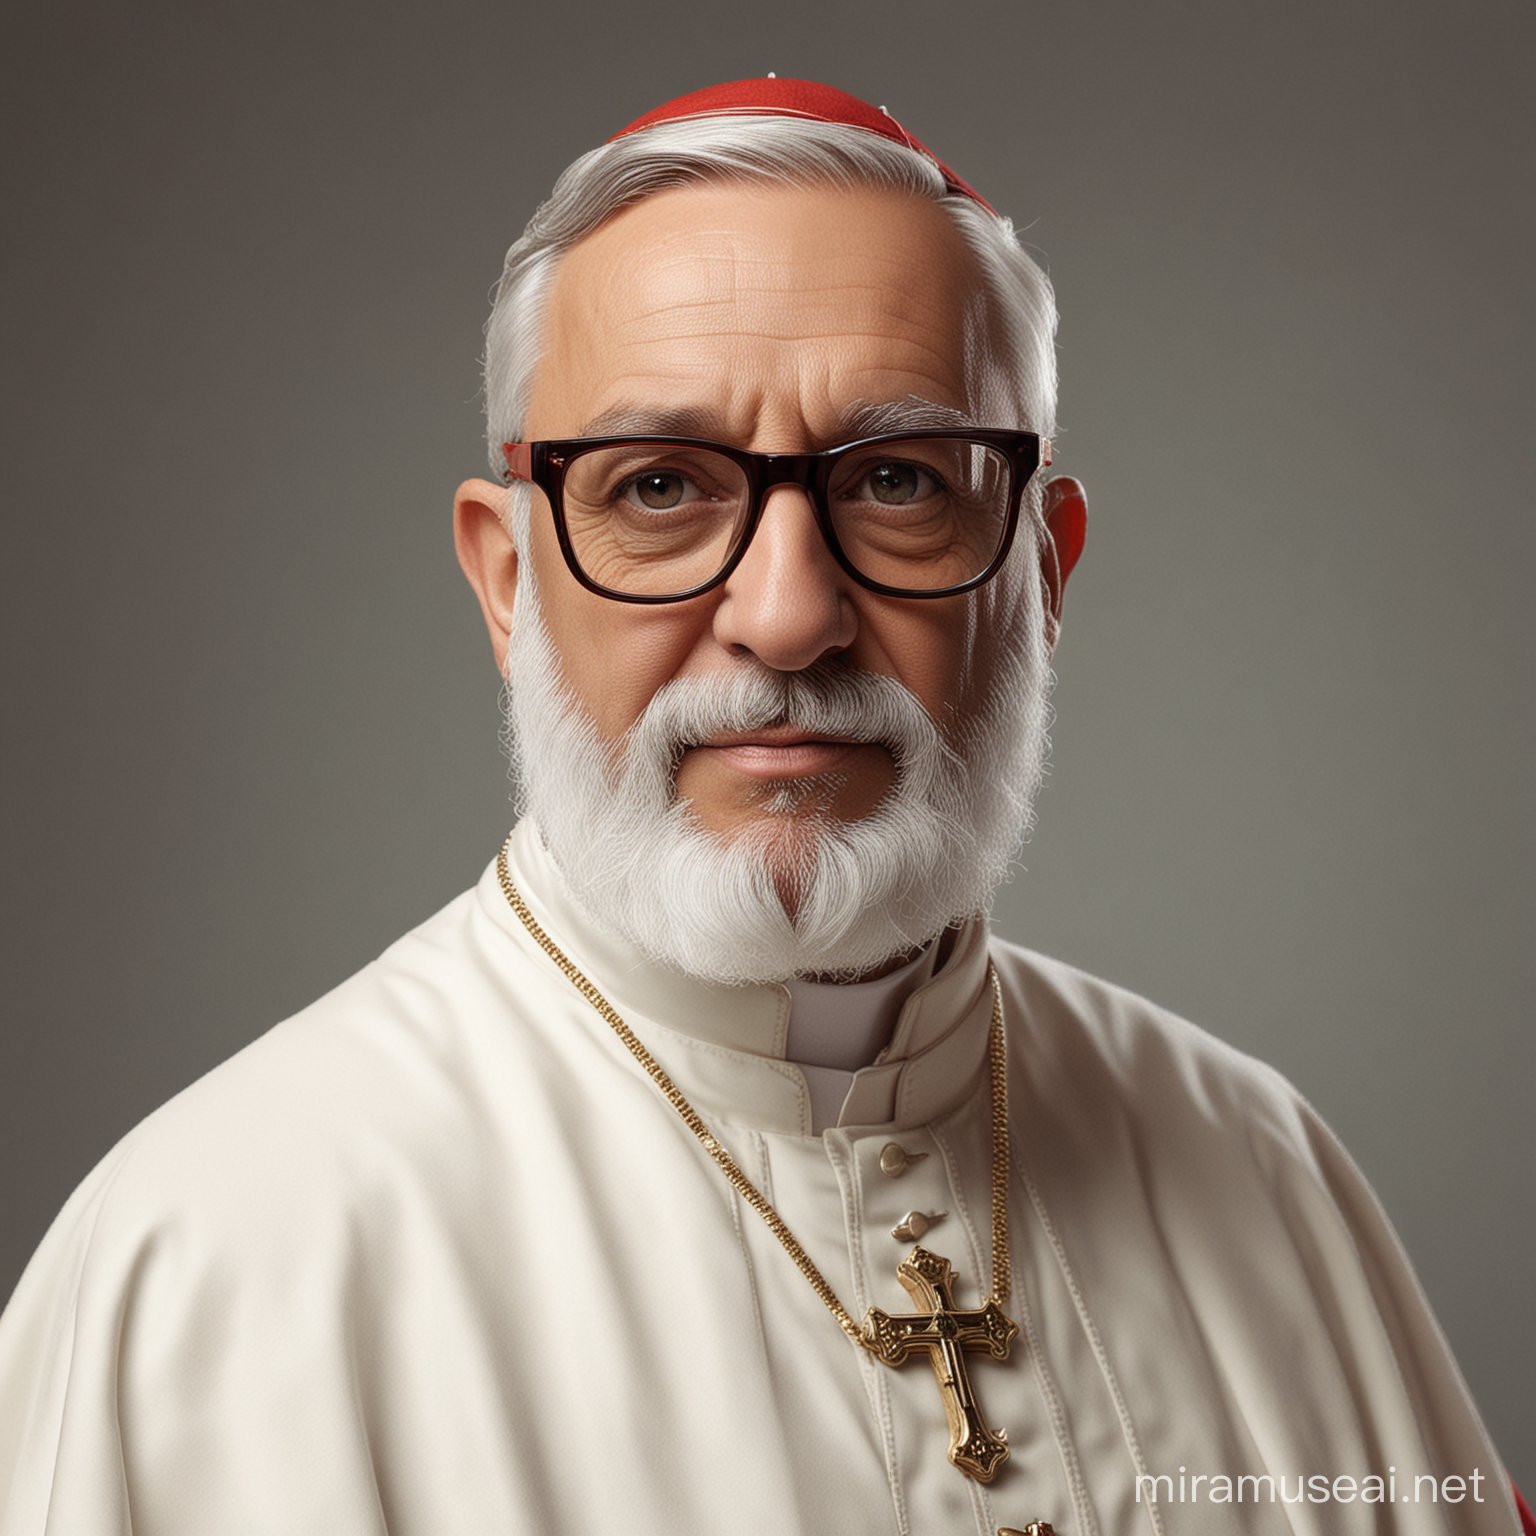 Vatican Cardinal with Glasses and White Robes